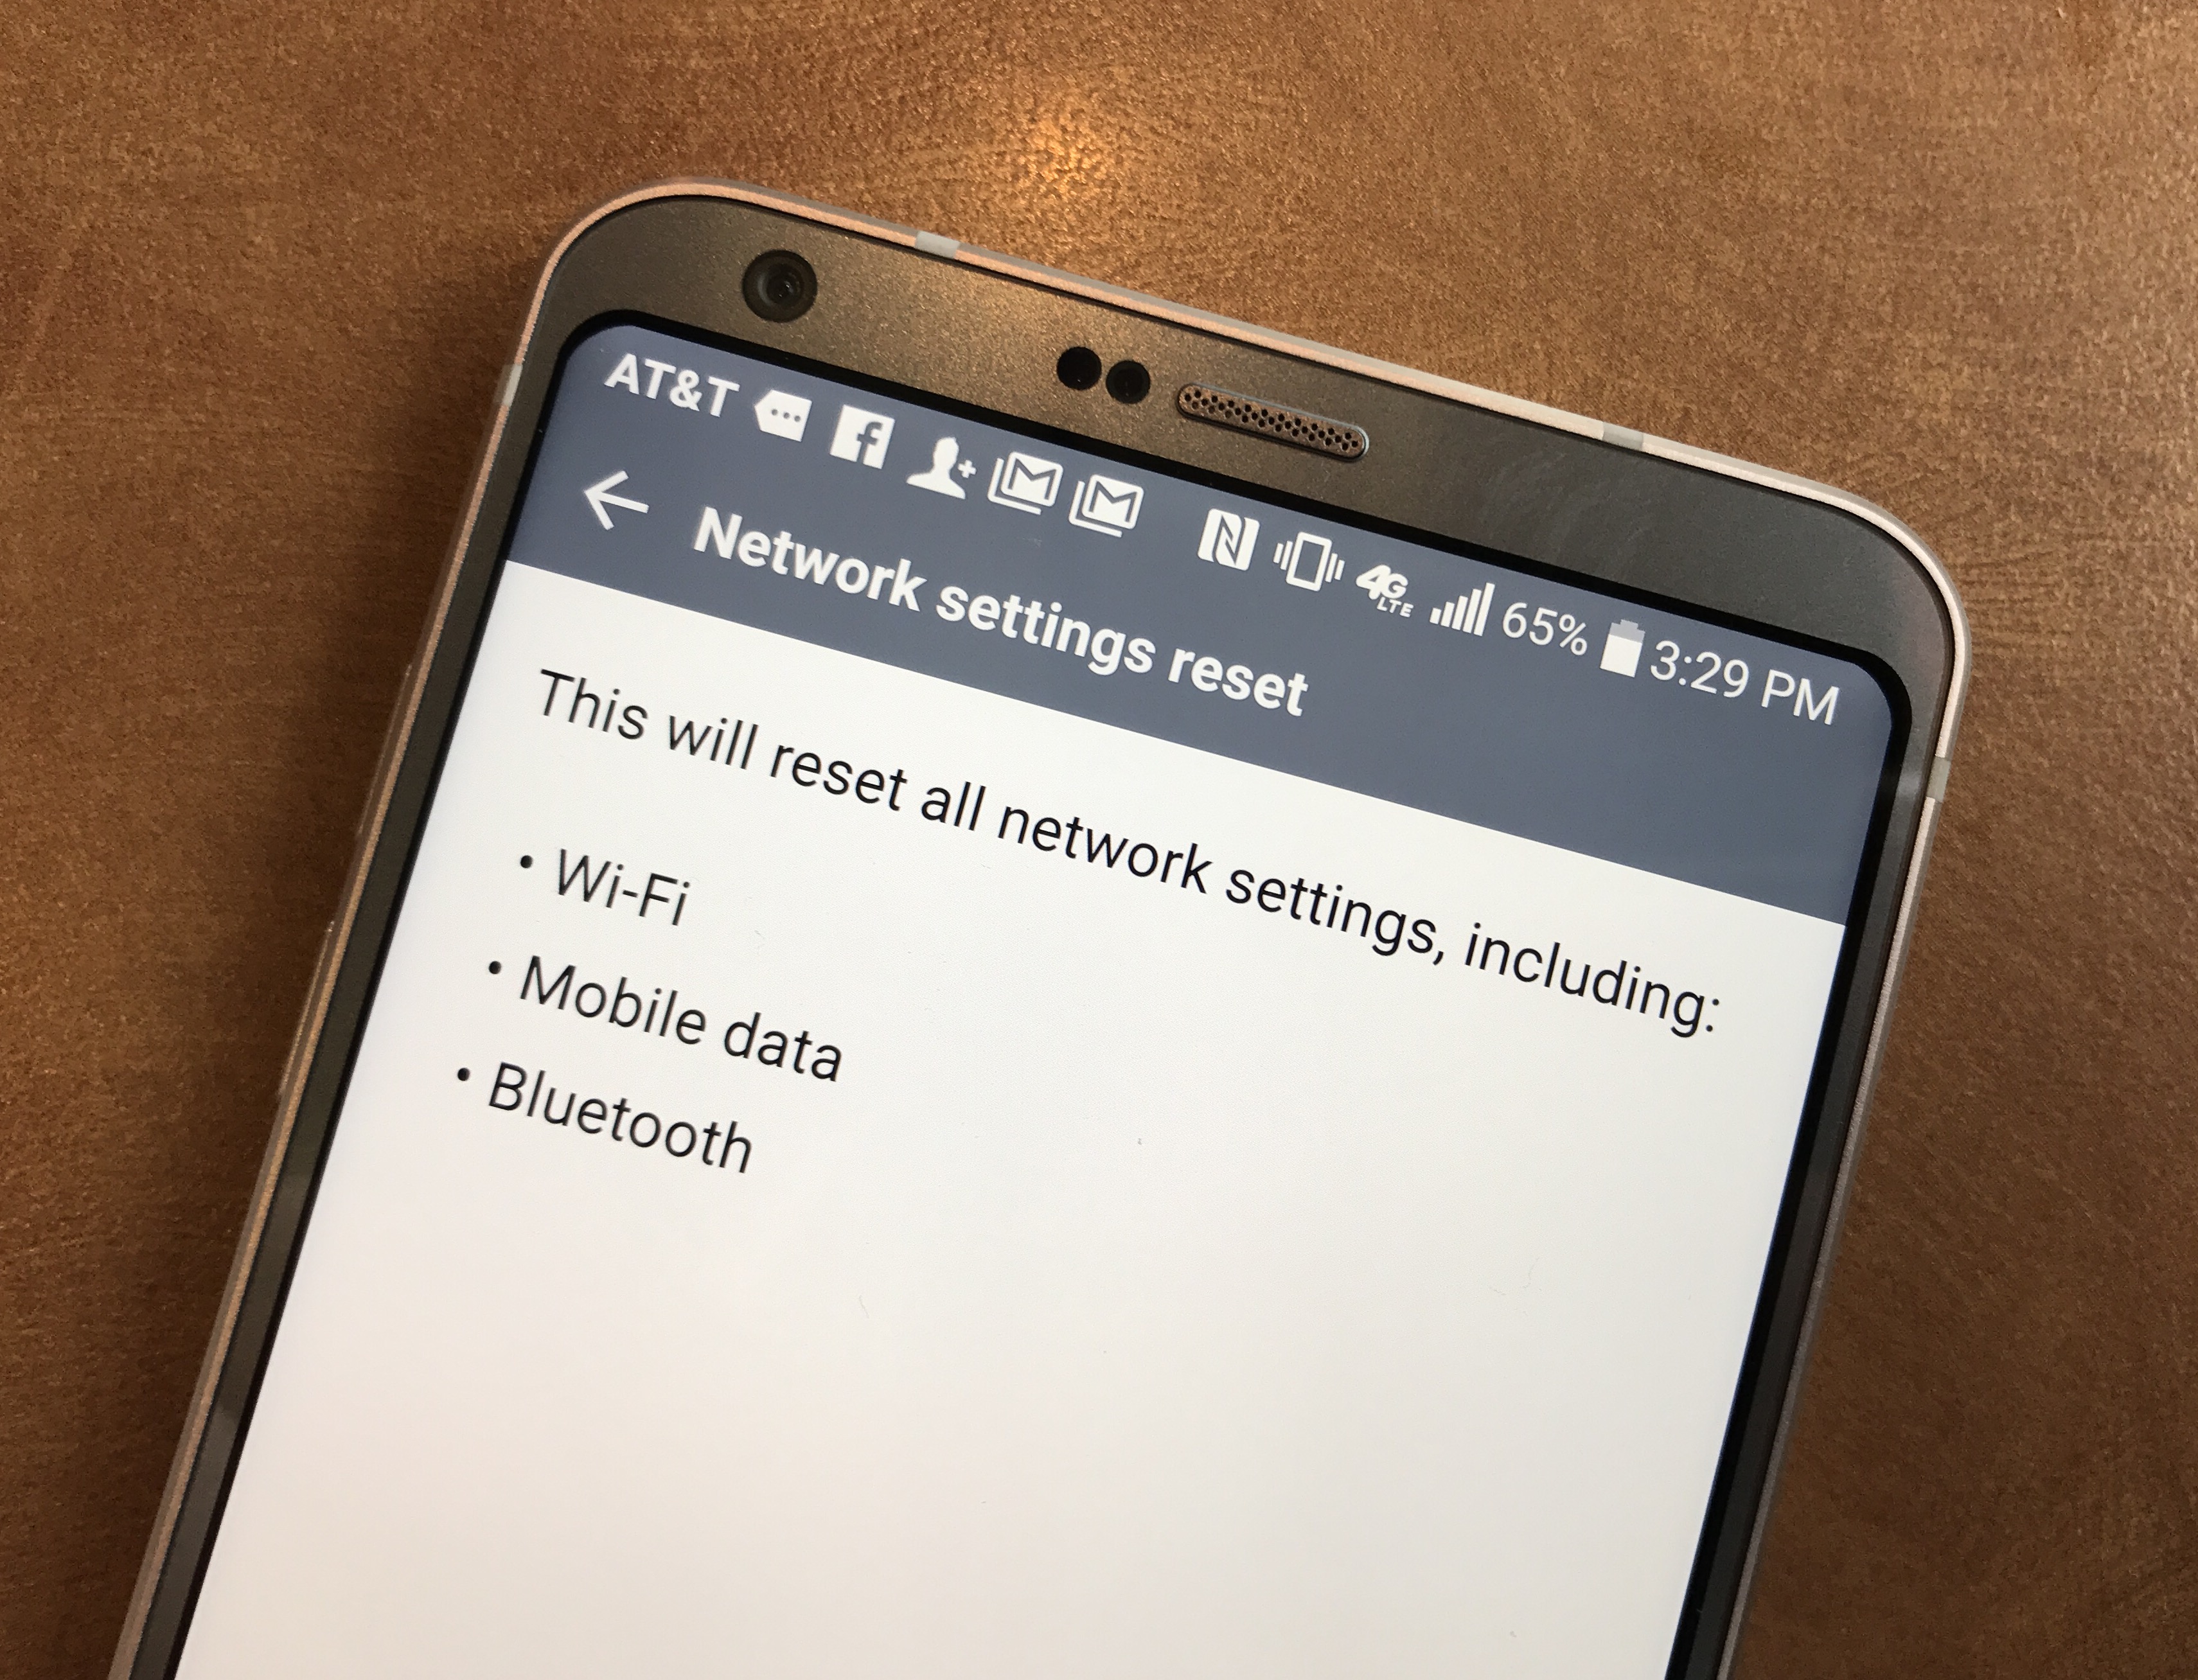 How to reset LG G6 Network Settings.